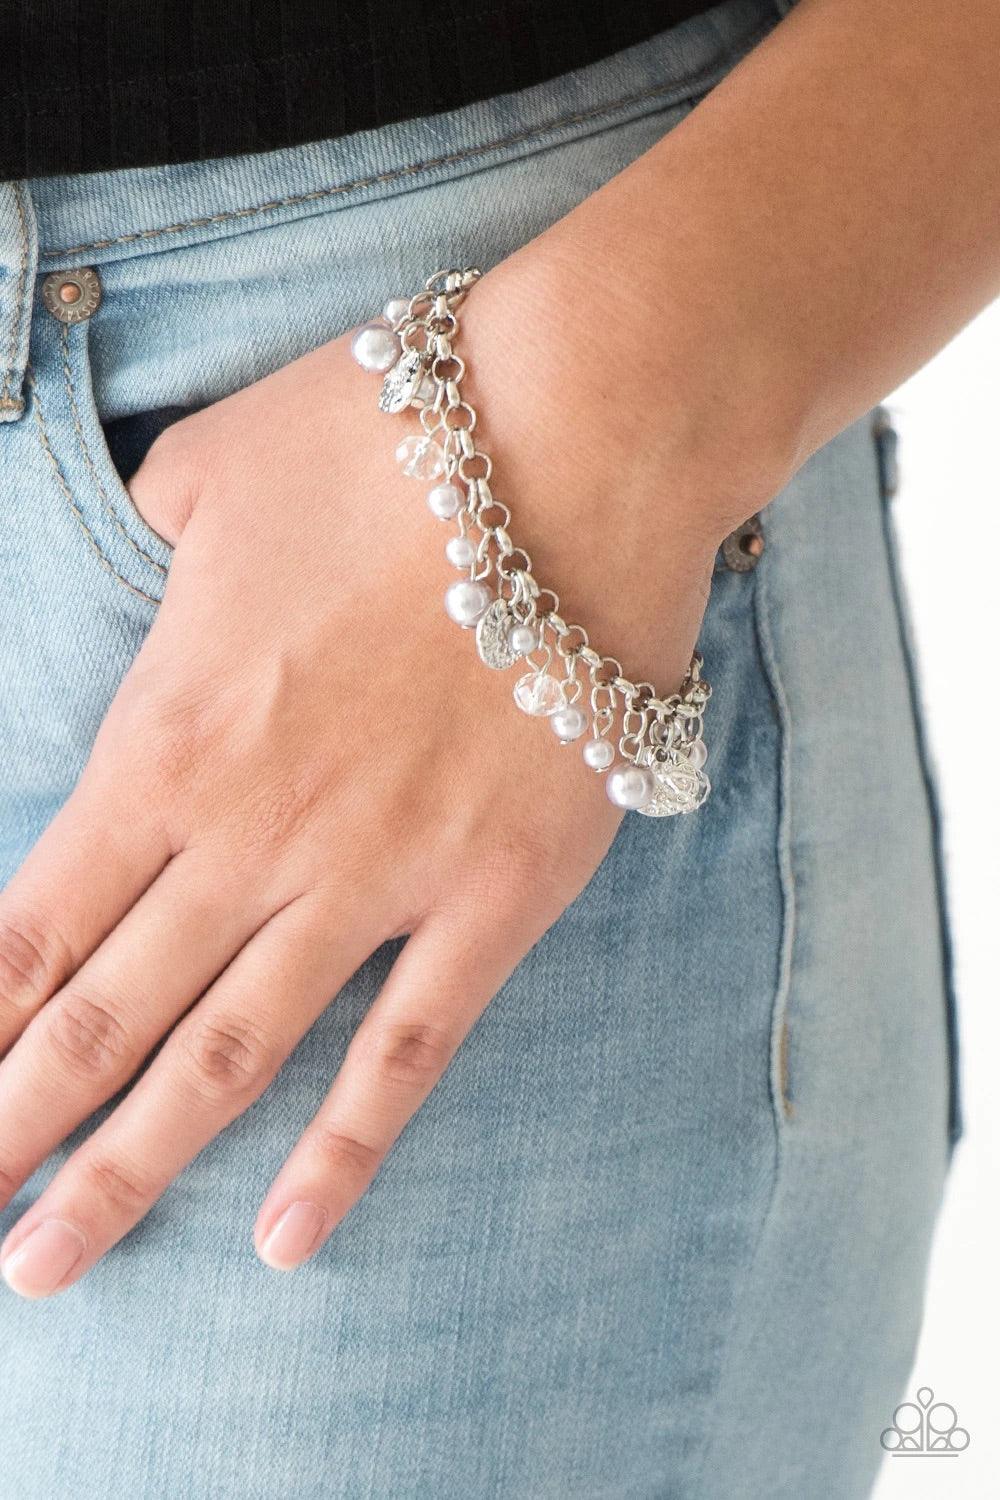 Paparazzi Accessories West Coast Wanderer - Silver Pearly silver beads, smoky crystal-like gems, and hammered silver discs swing from a bold silver chain, creating a refined fringe around the wrist. Features an adjustable clasp closure.Sold as one individ